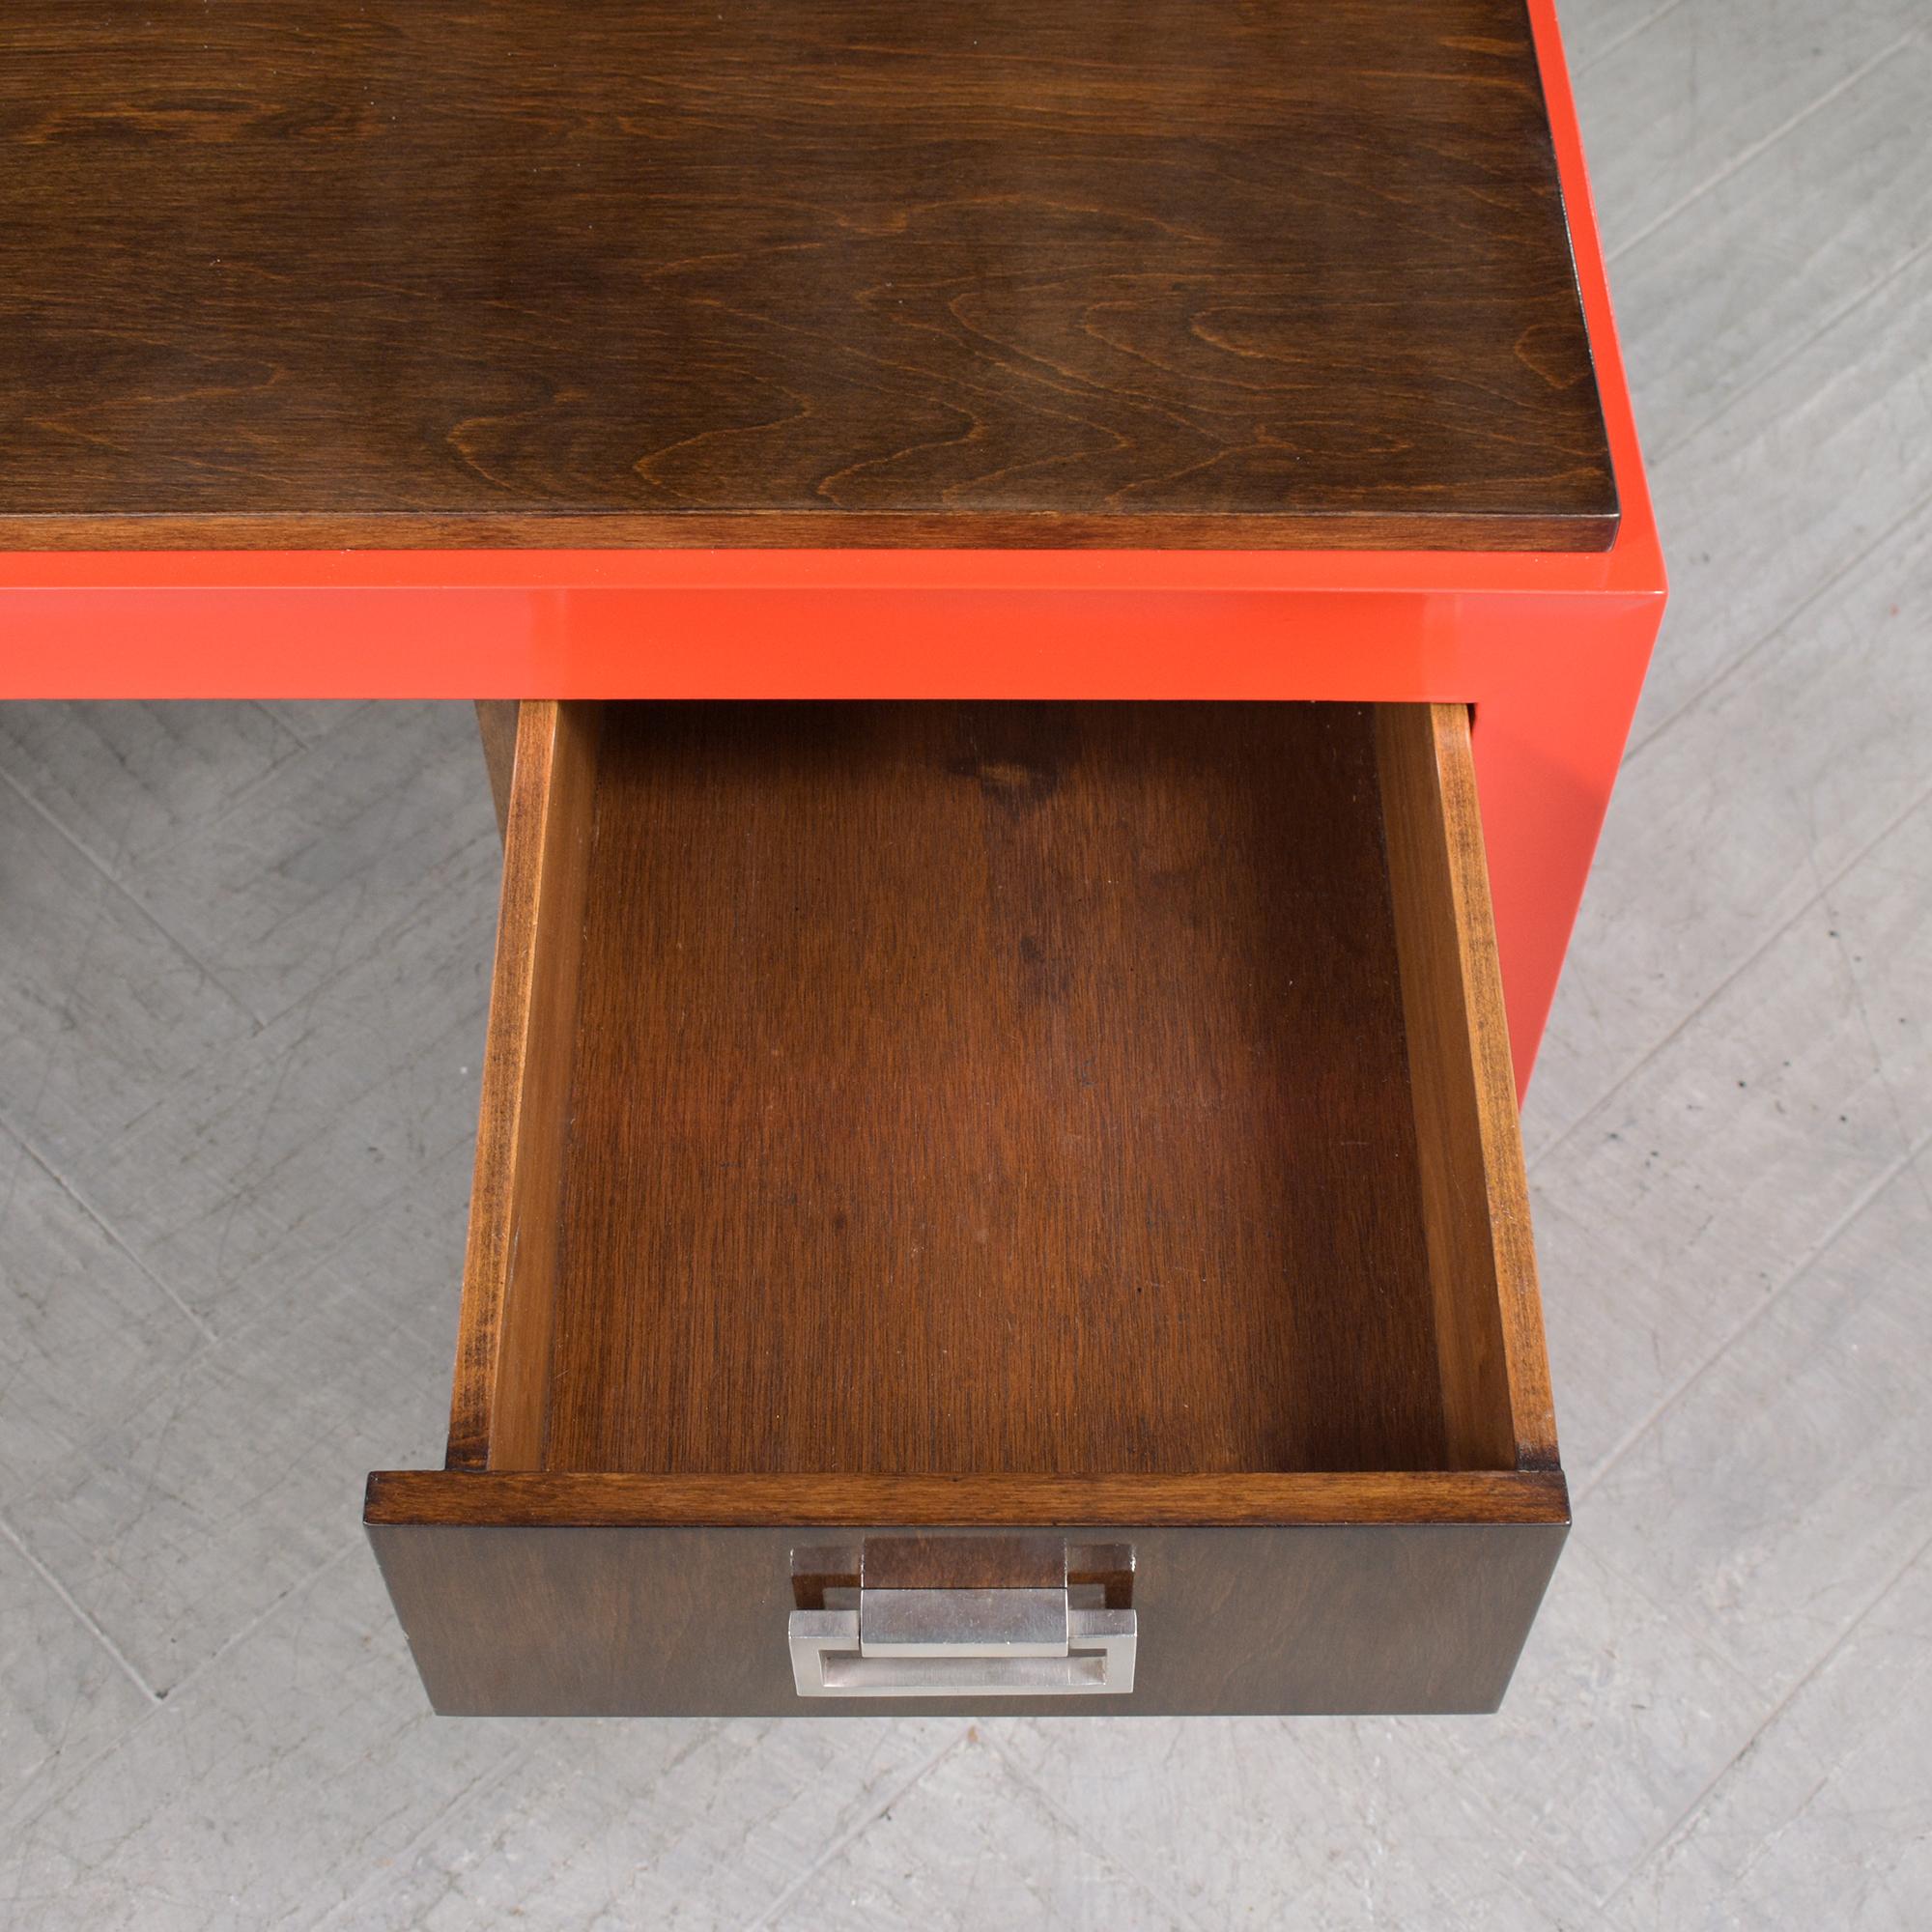 Metal 1960s Mid-Century Modern Walnut Desk with Vibrant Red Lacquer Finish For Sale